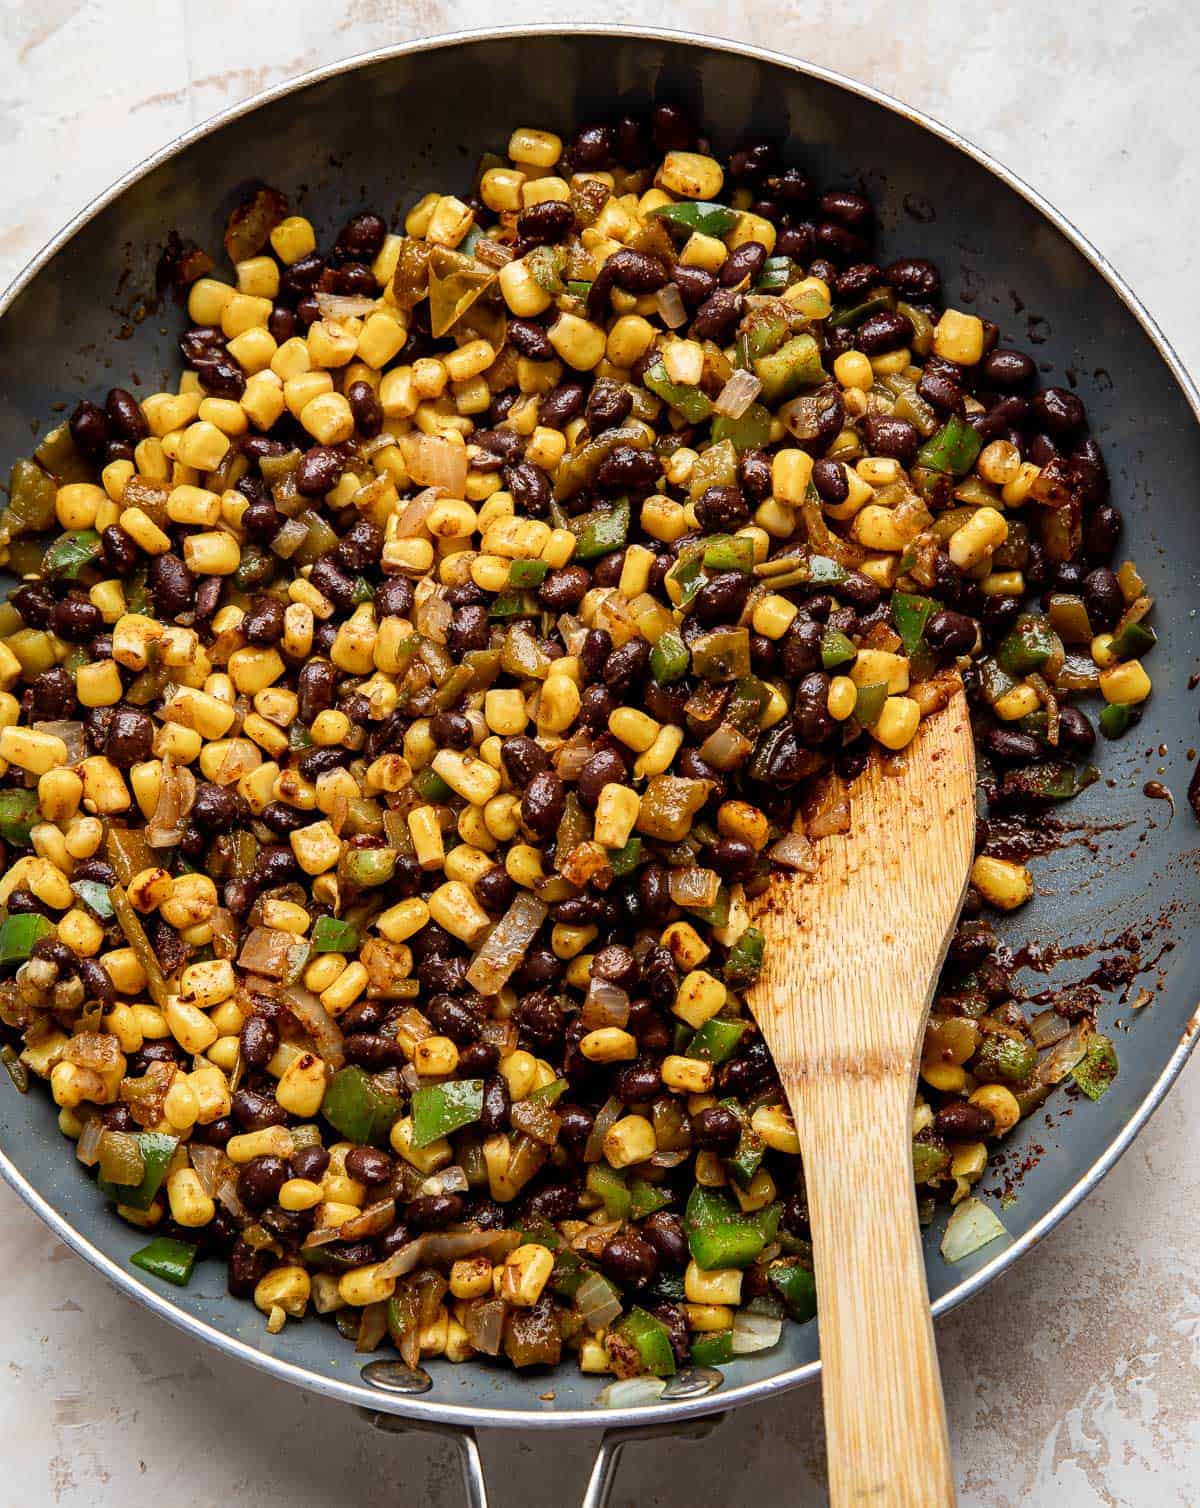 A close up of corn, black bean, and pepper mixture in a gray skillet.